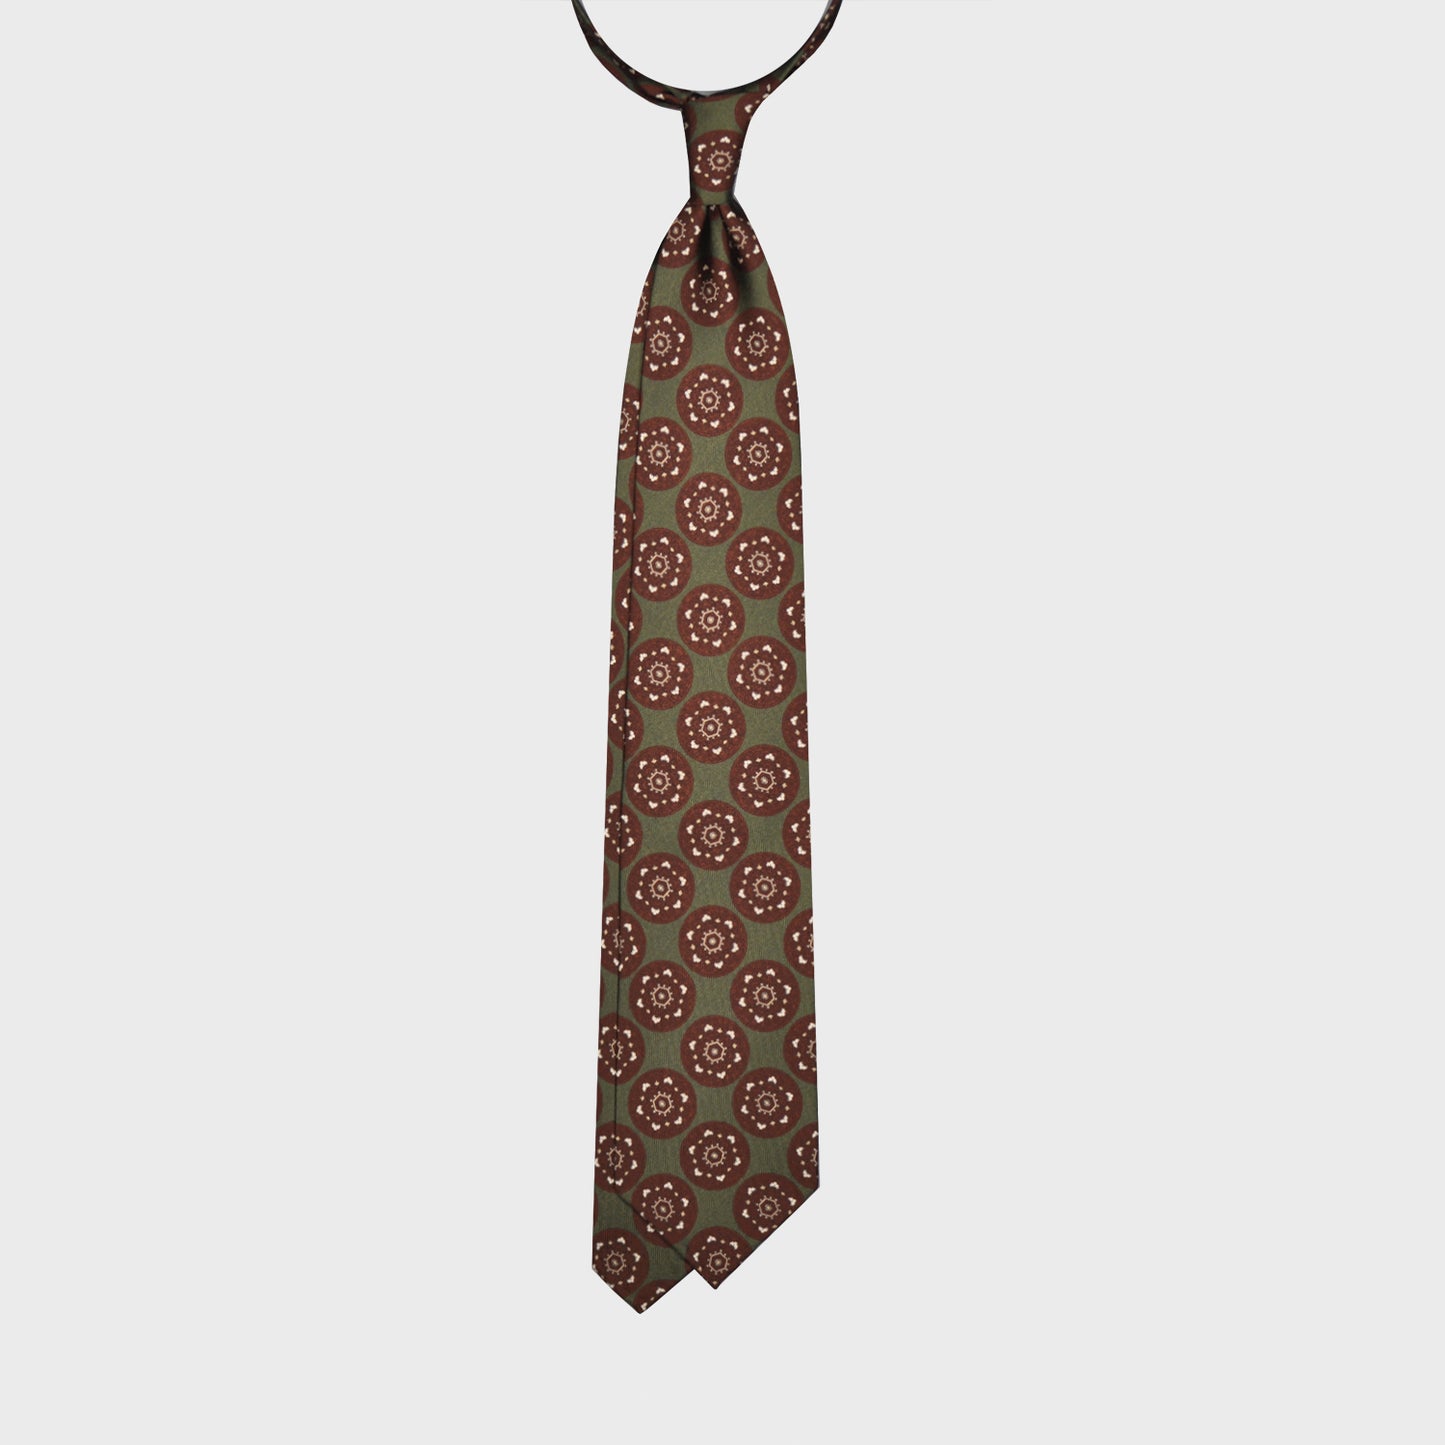 Load image into Gallery viewer, F.Marino Silk Tie 3 Folds Mandala Medallions Army Green-Wools Boutique Uomo
